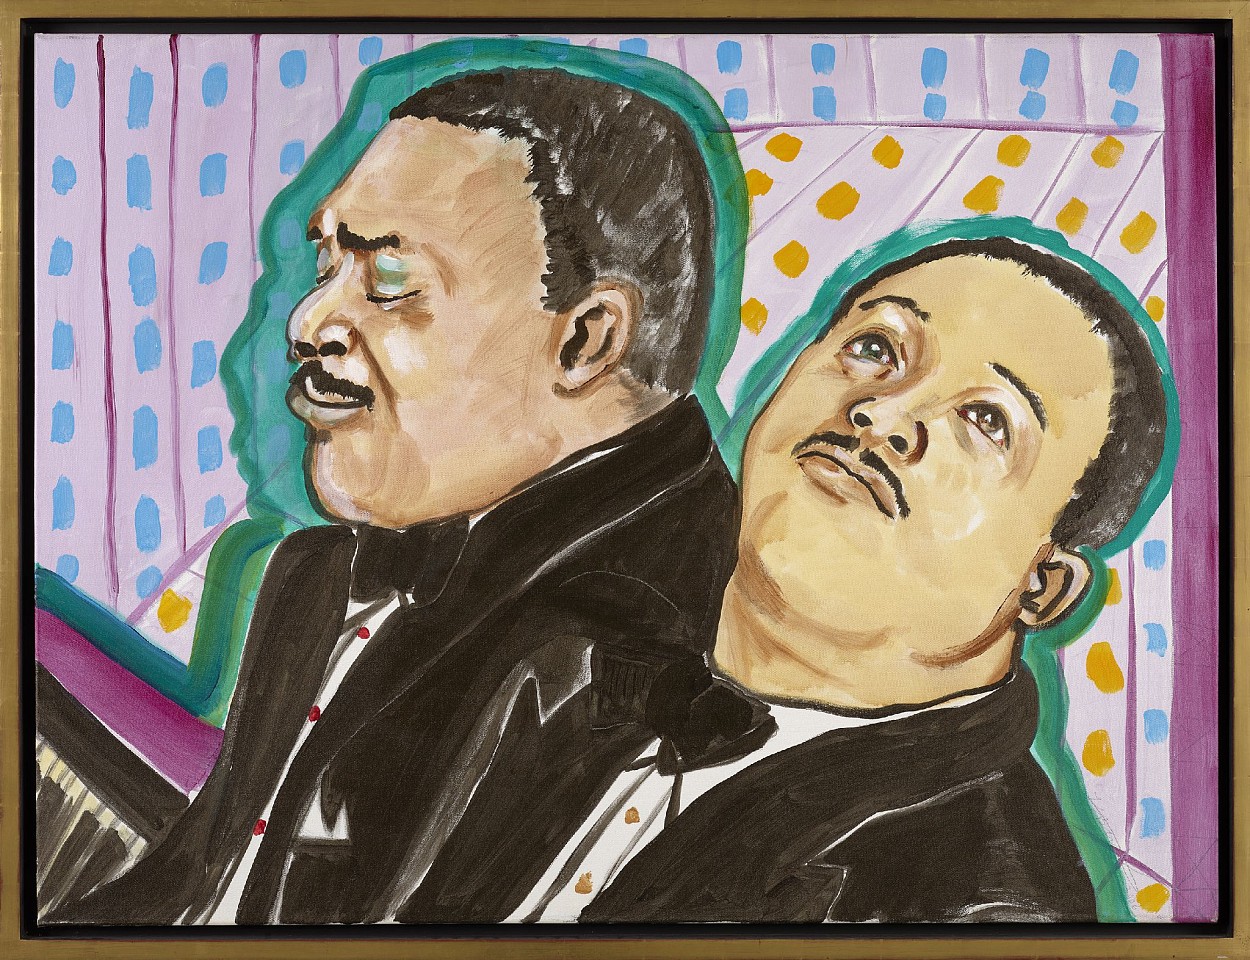 Frederick J. Brown, Albert Ammons and Meade Lux Lewis, c. 2006
Oil on canvas, 36 x 48 in. (91.4 x 121.9 cm)
BROW-00051